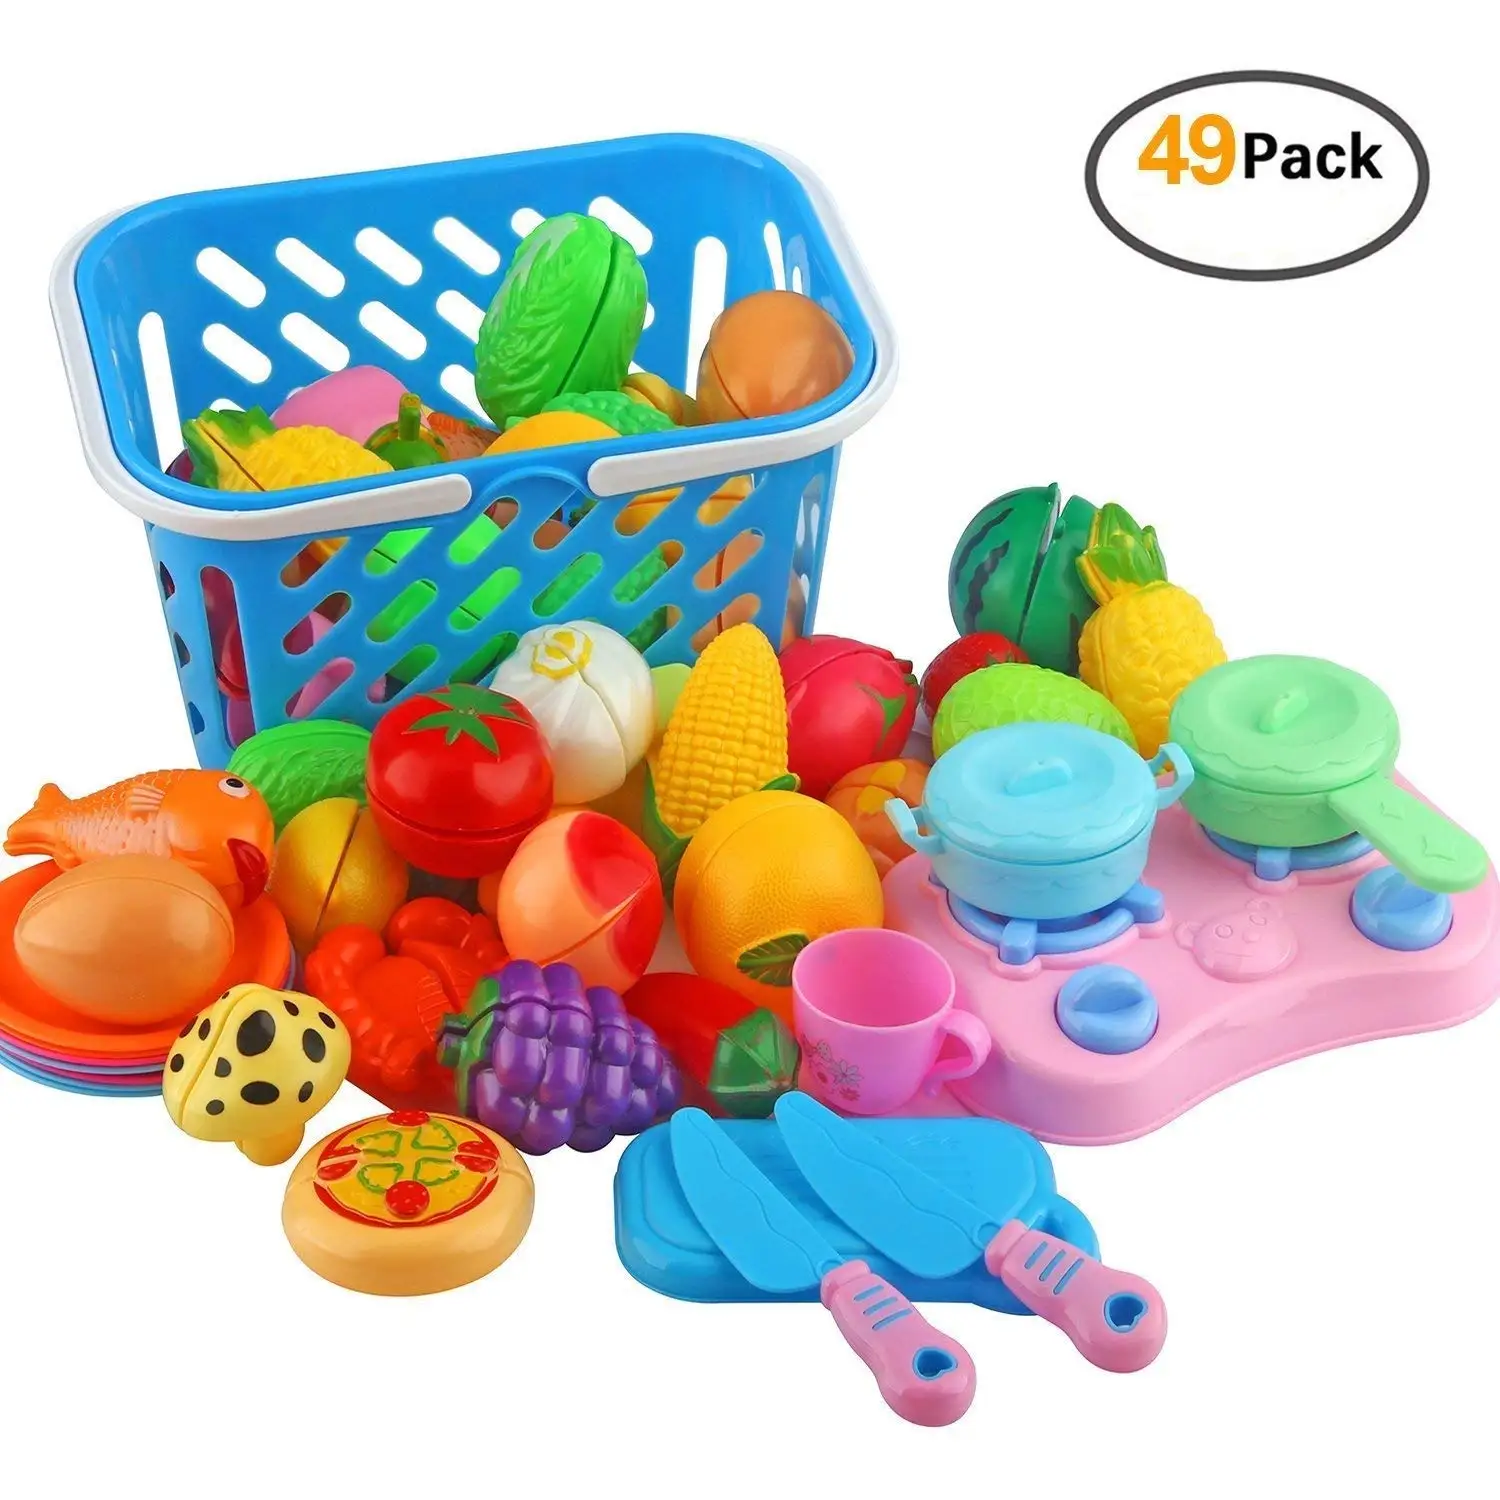 Buy LEARNING RESOURCES Favorite Play Food play house set play house ...